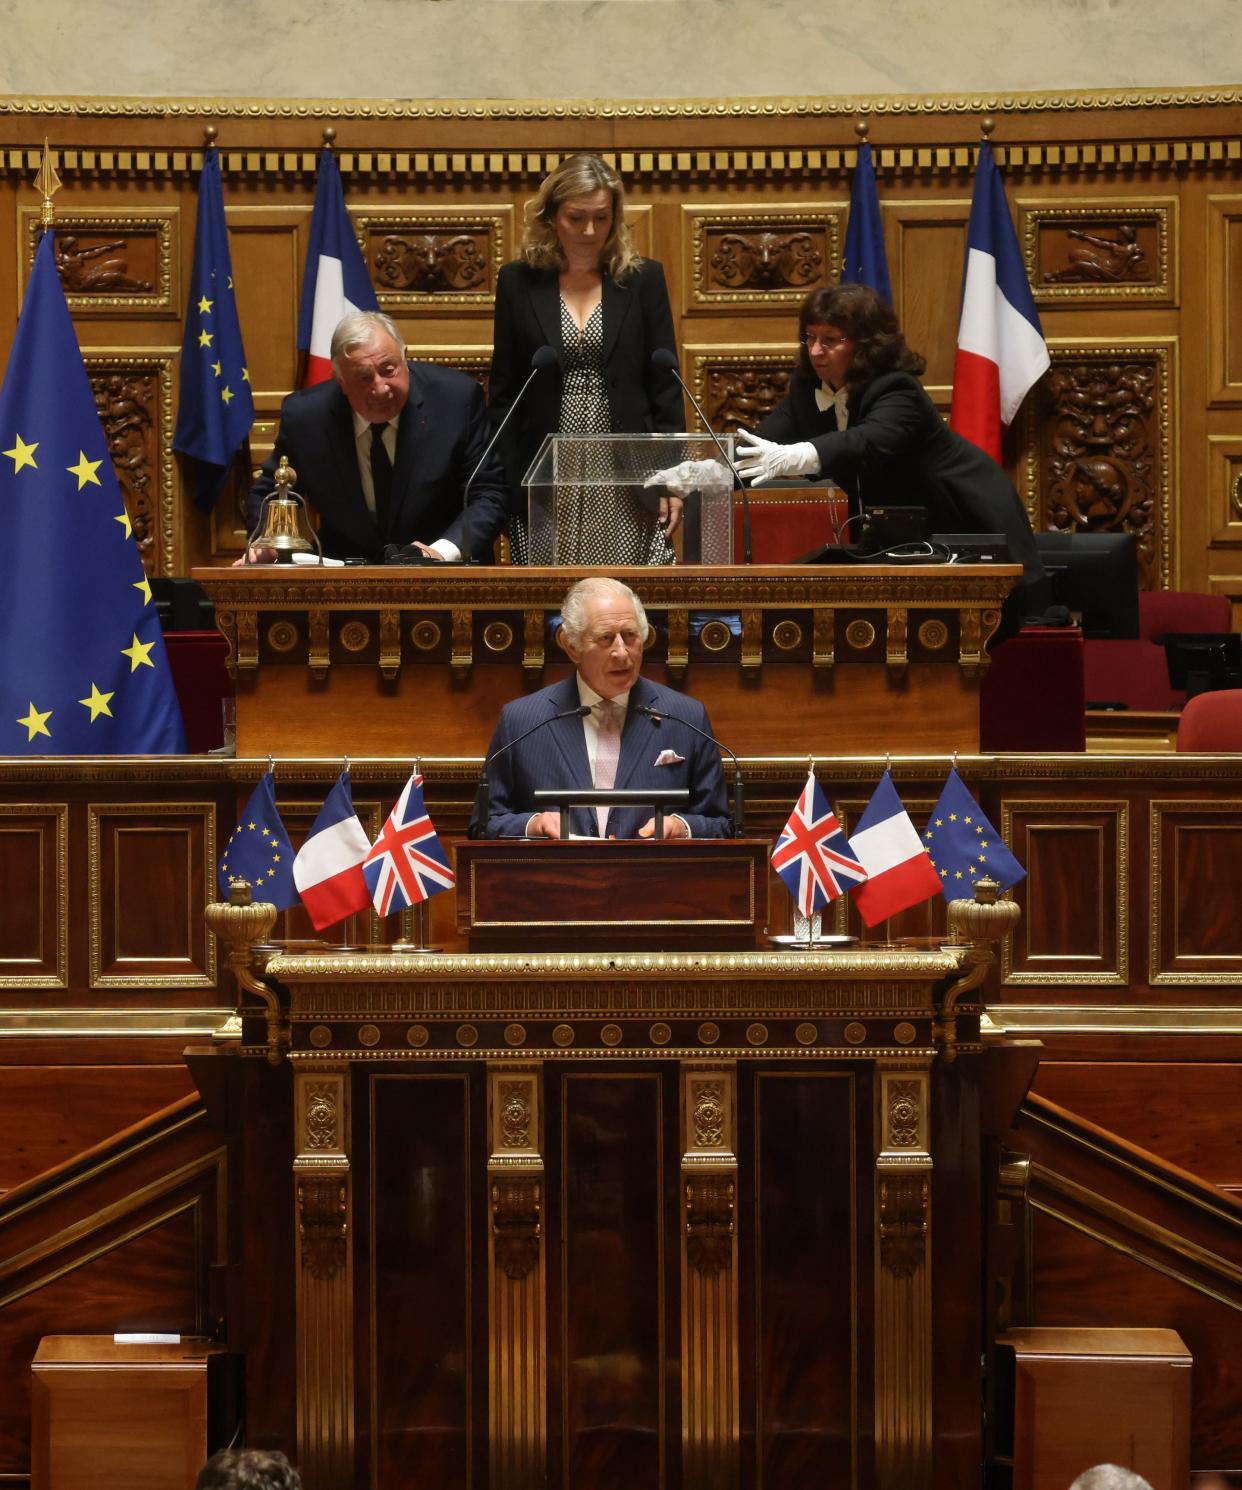 King Charles III addresses parliamentarians in the Senate Chamber, at Luxembourg Palace in Paris (Ian Vogler/Daily Mirror/PA Wire)